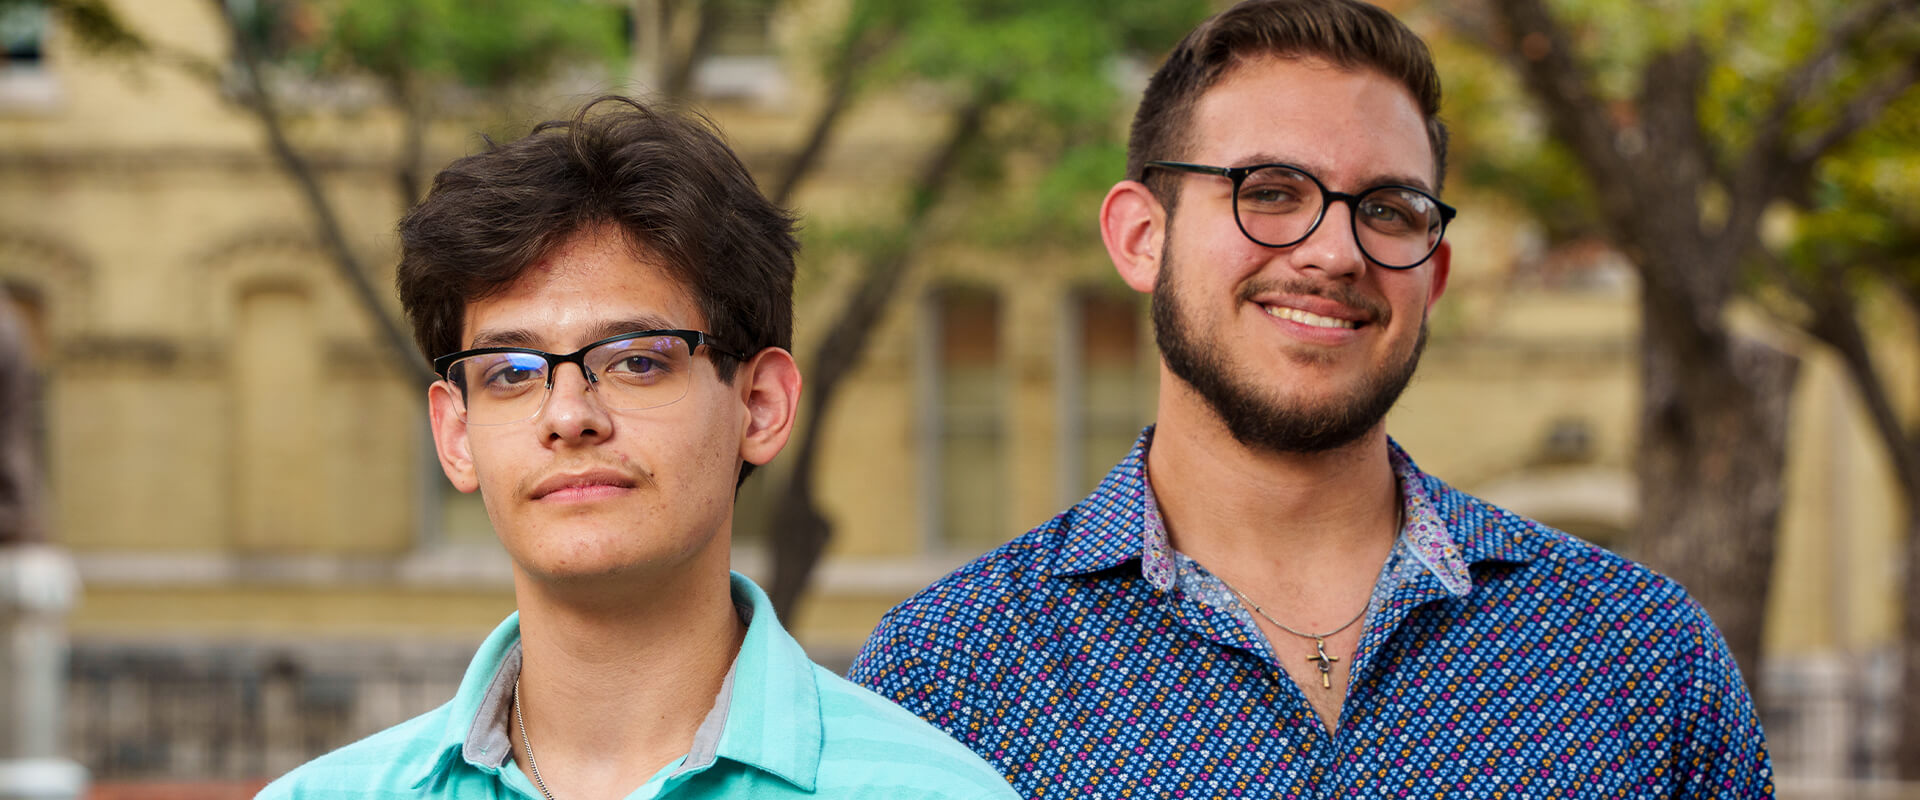 Education centered around service and perseverance is important to brothers Kai Solonka, right, and Aidan Solonka. Their first experiences with Marianist education came as they each entered Central Catholic High School.